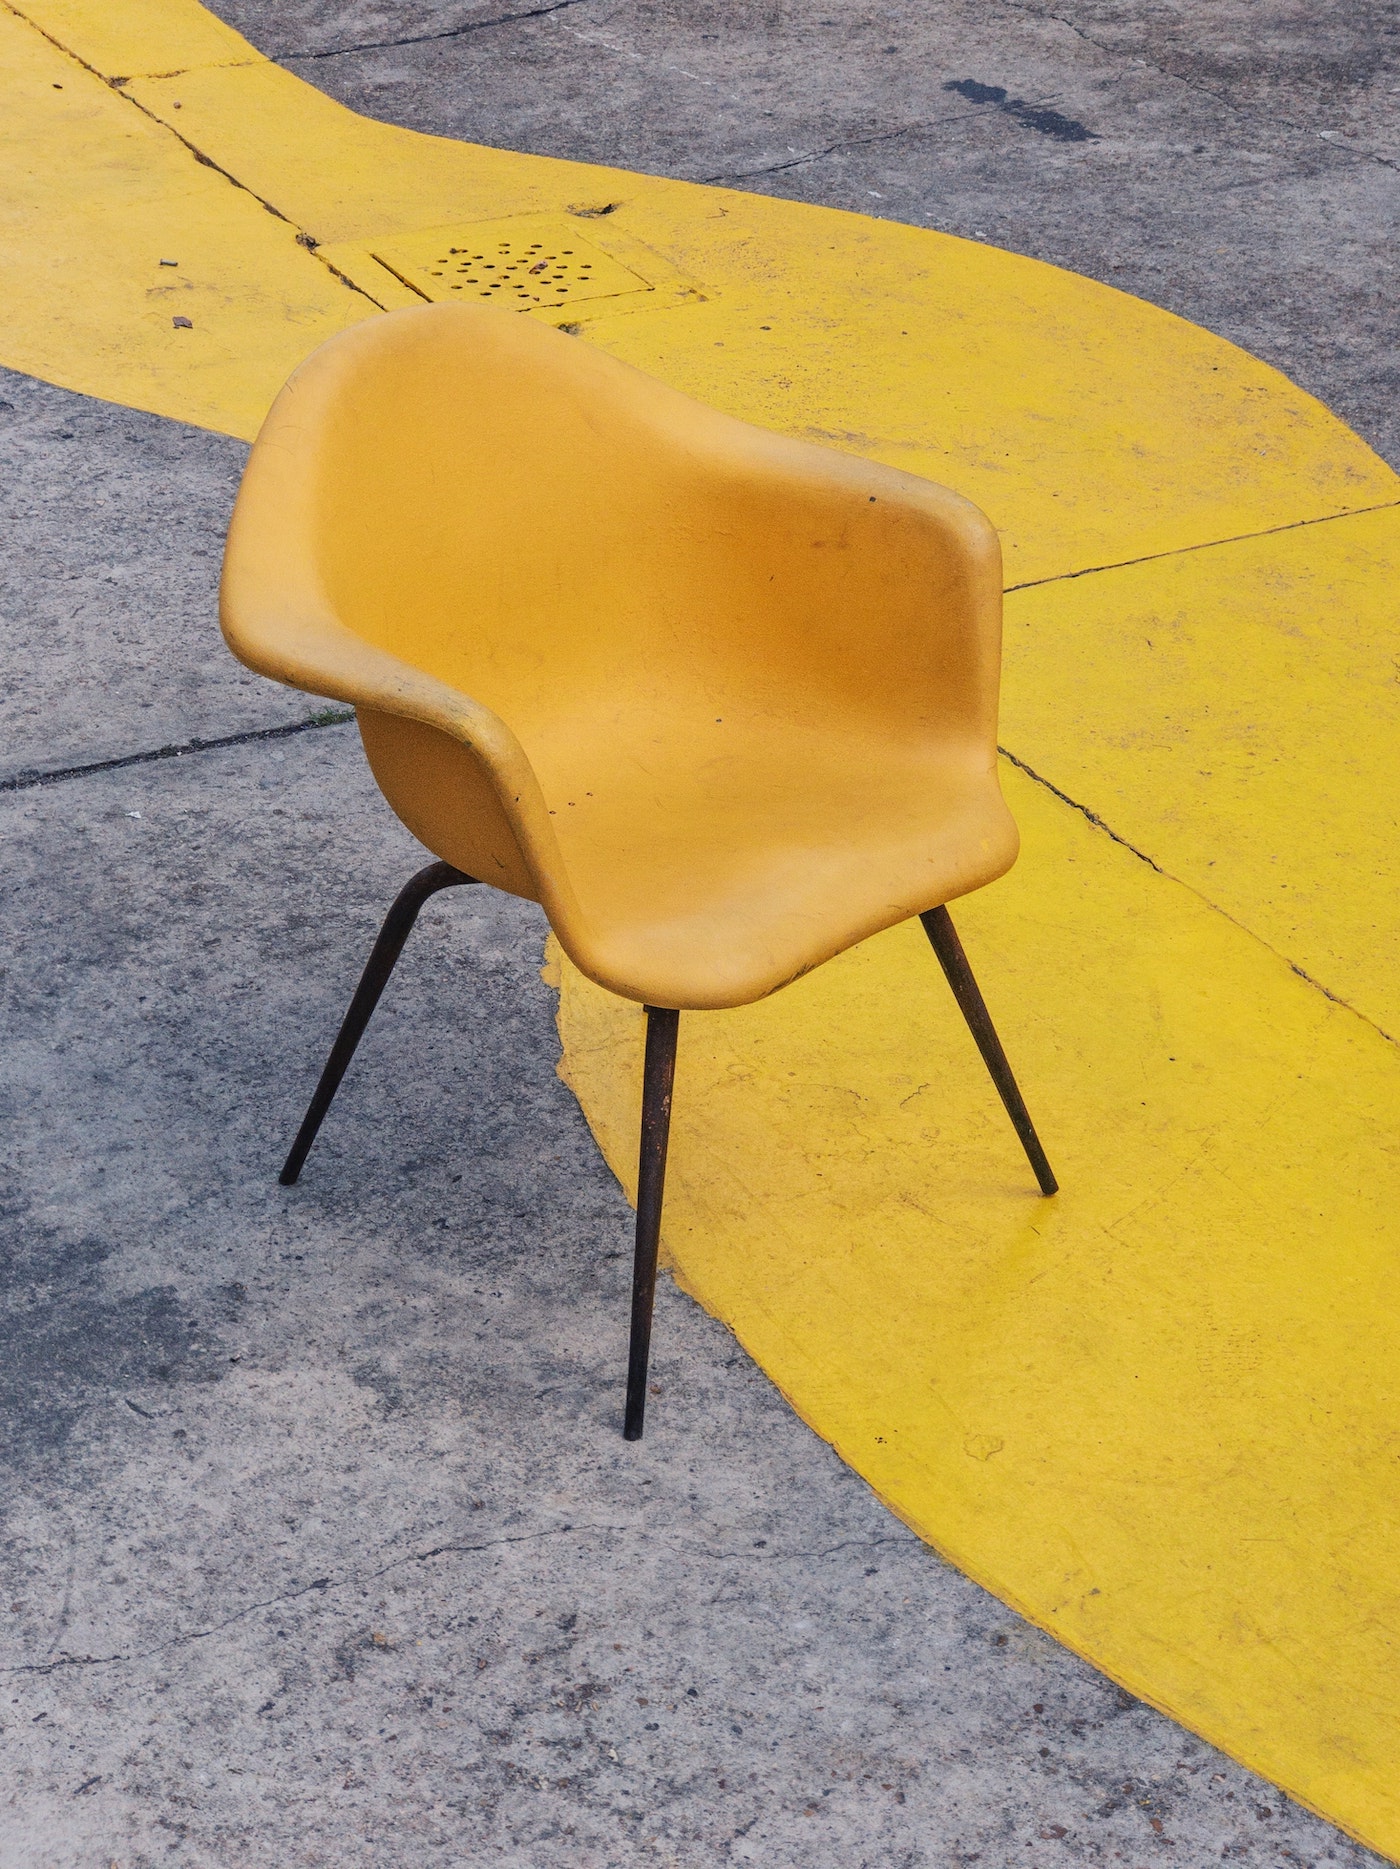 Funky Yellow Chair